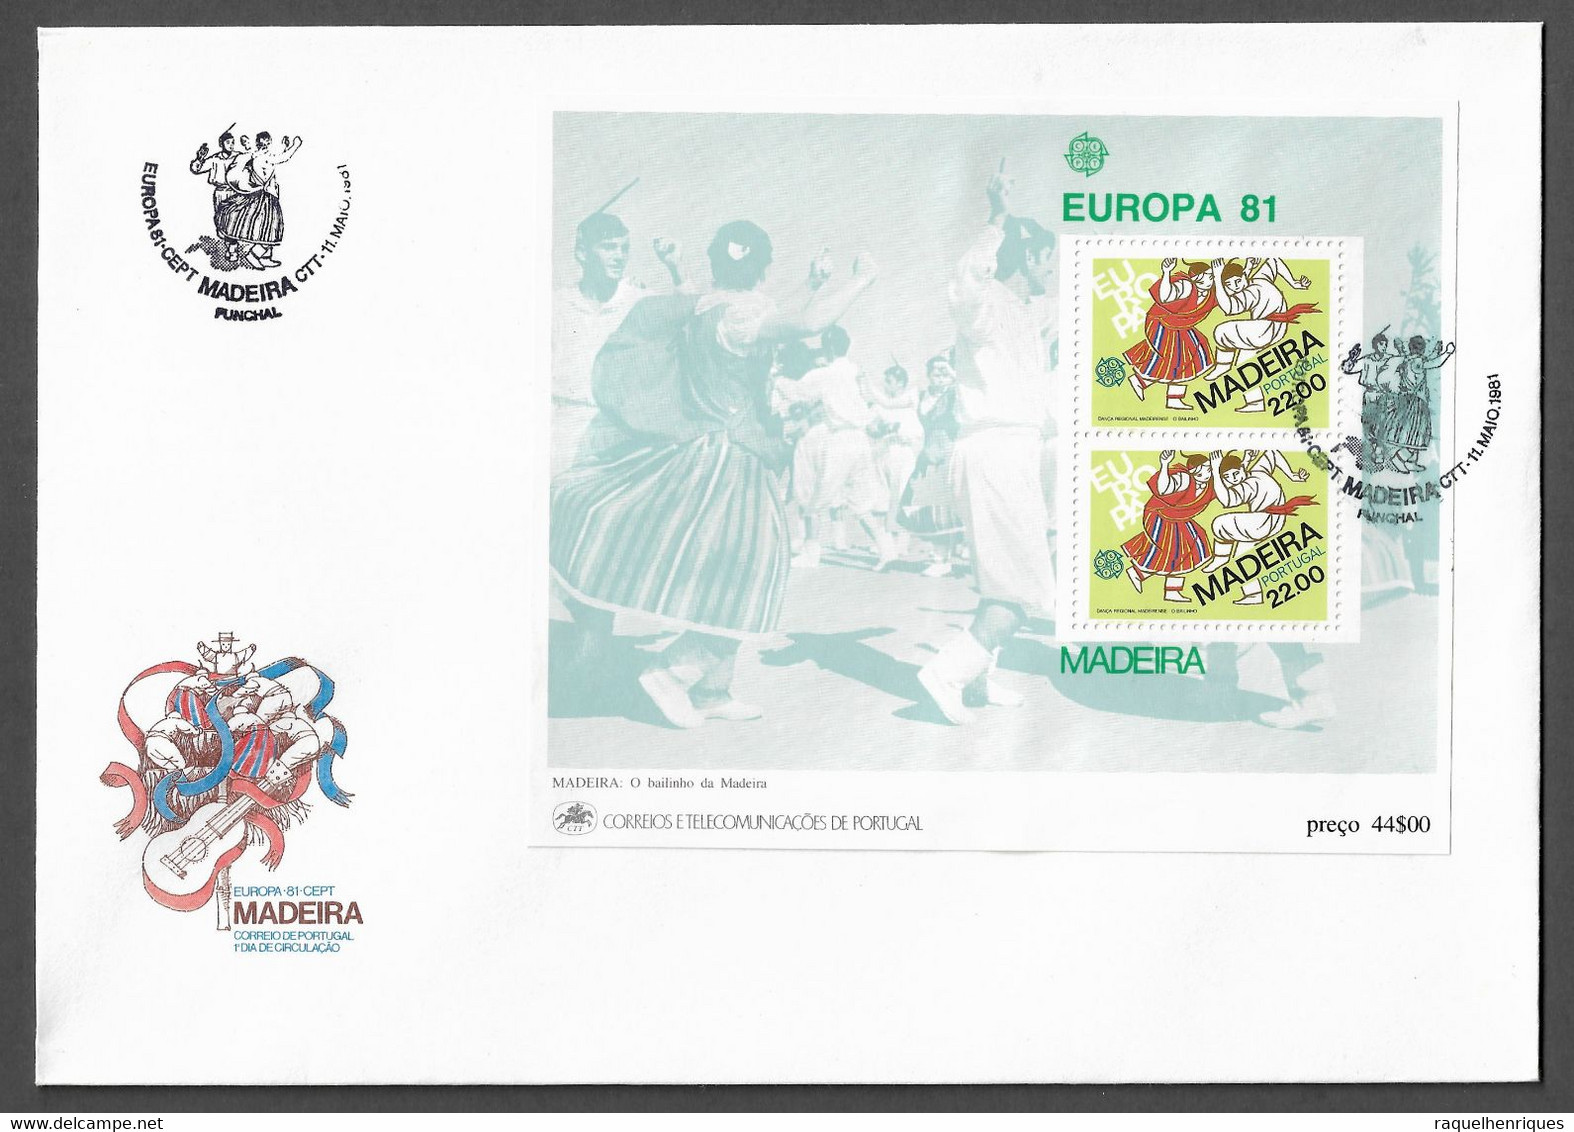 PORTUGAL FDCB - 1981 EUROPA Stamps - MADEIRA - CARIMBO FUNCHAL (FDCB#37) - FDC